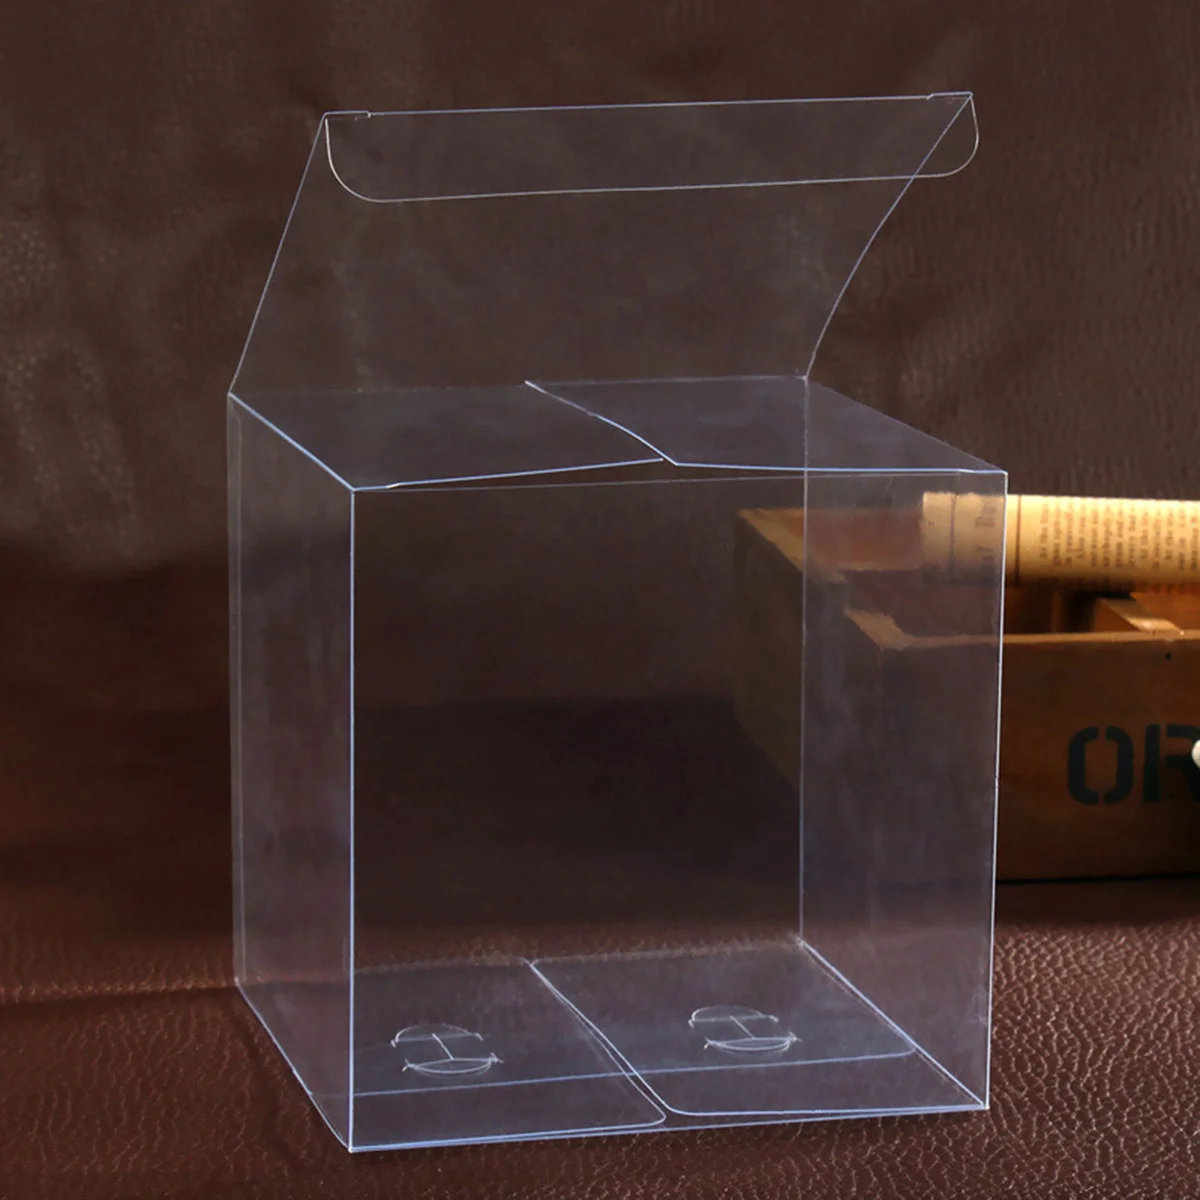 

Boxes Clear Box Gift Candy Favor Transparent Favors Cube Wedding Packaging Gifts Cupcake Party Organizer Cake Display